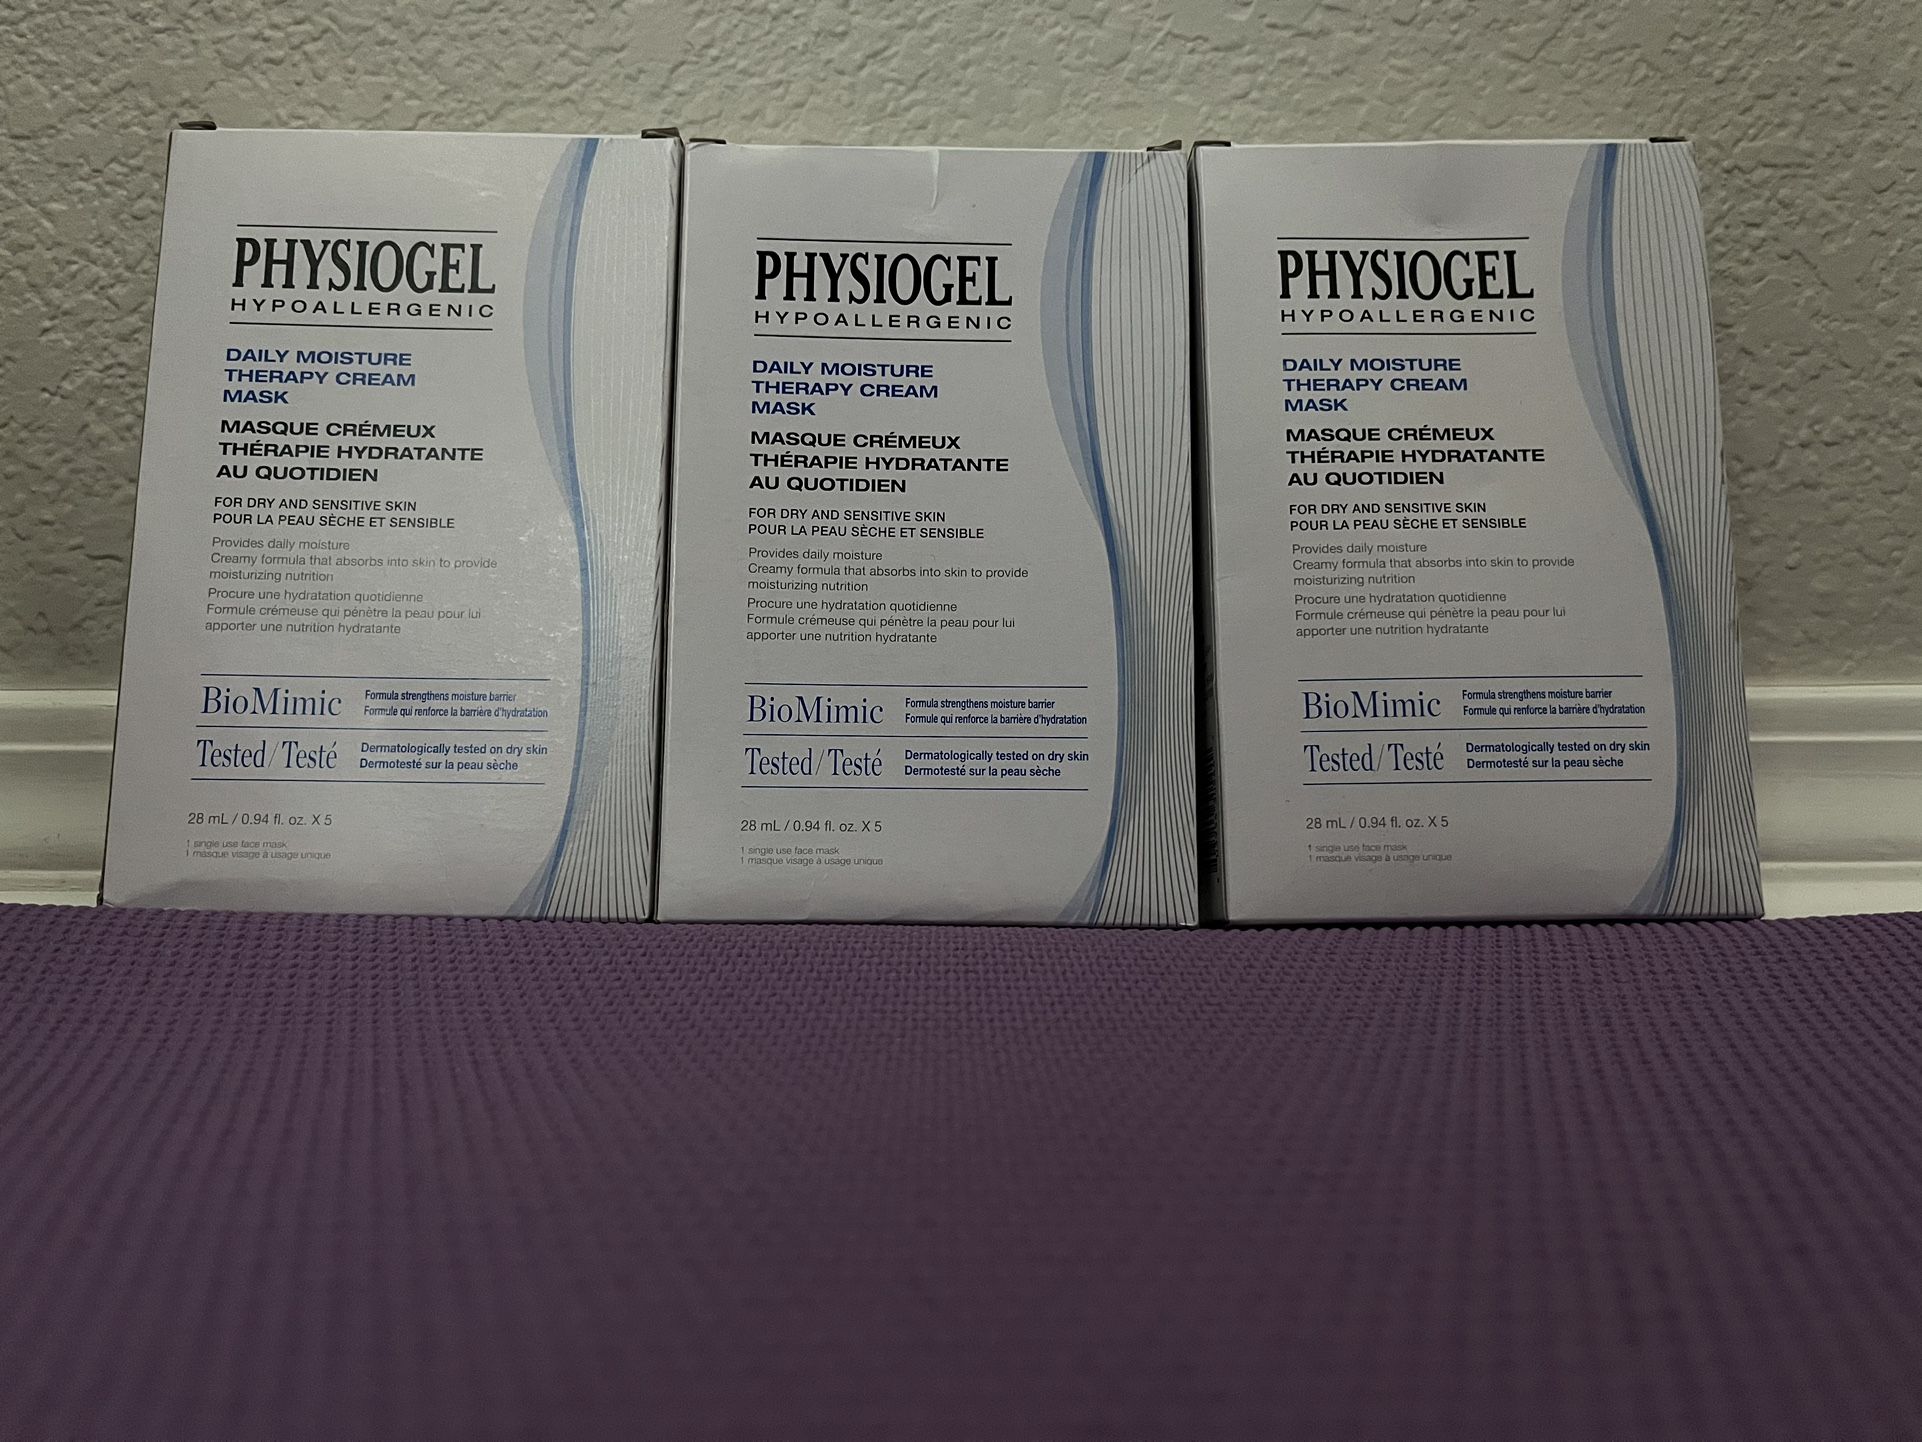 Physiogel Hypoallergenic Face Masks